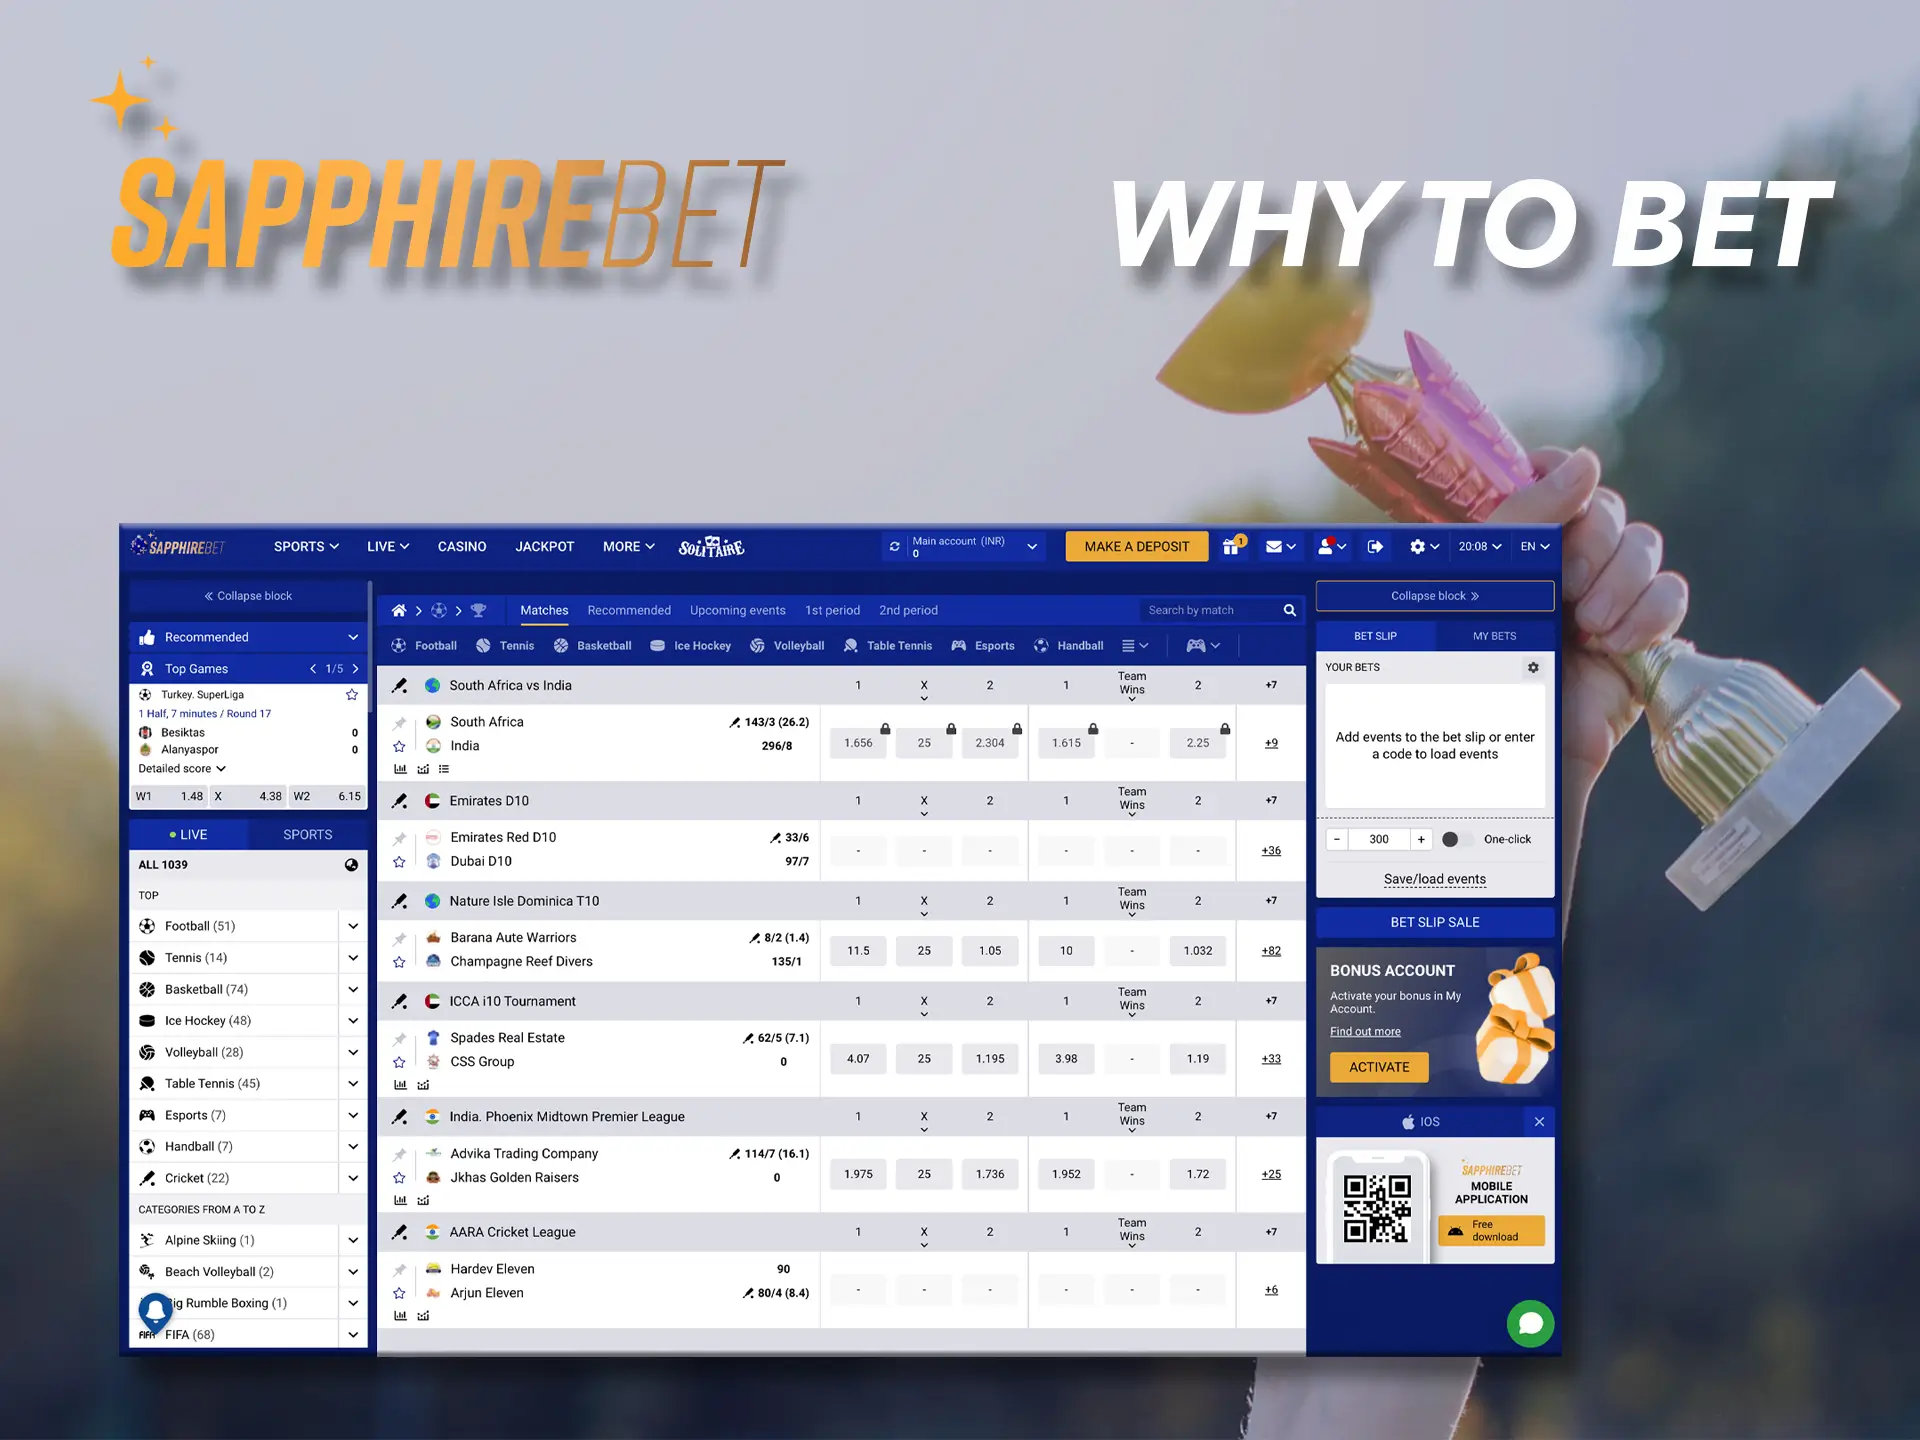 Sapphirebet has won the hearts of many players from India due to its excellent and quality service.